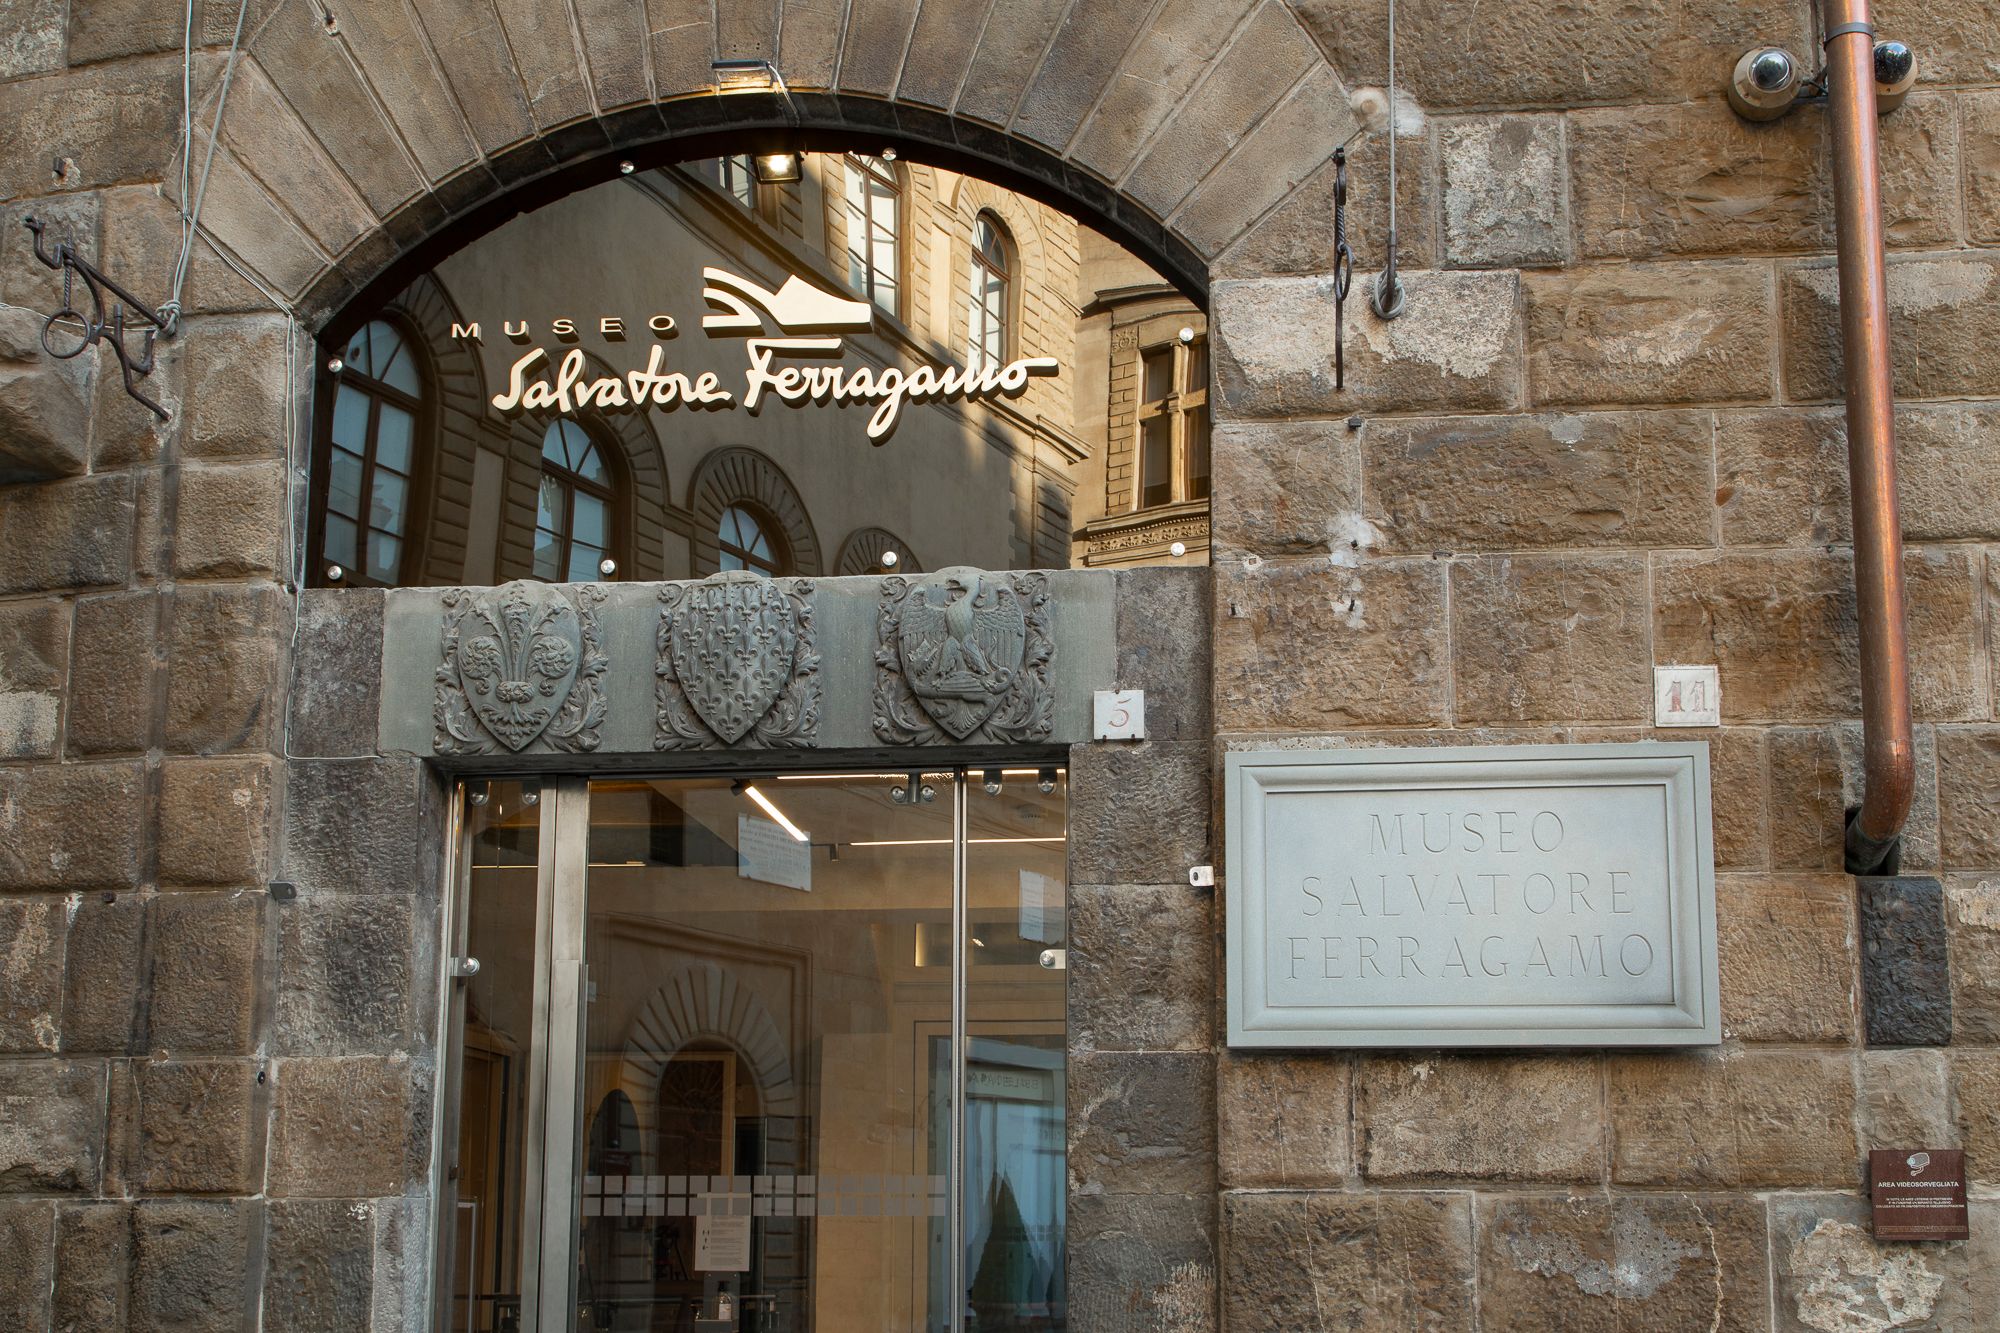 Salvatore Ferragamo Museum, Florence Hours, exhibitions and artworks on Artsupp